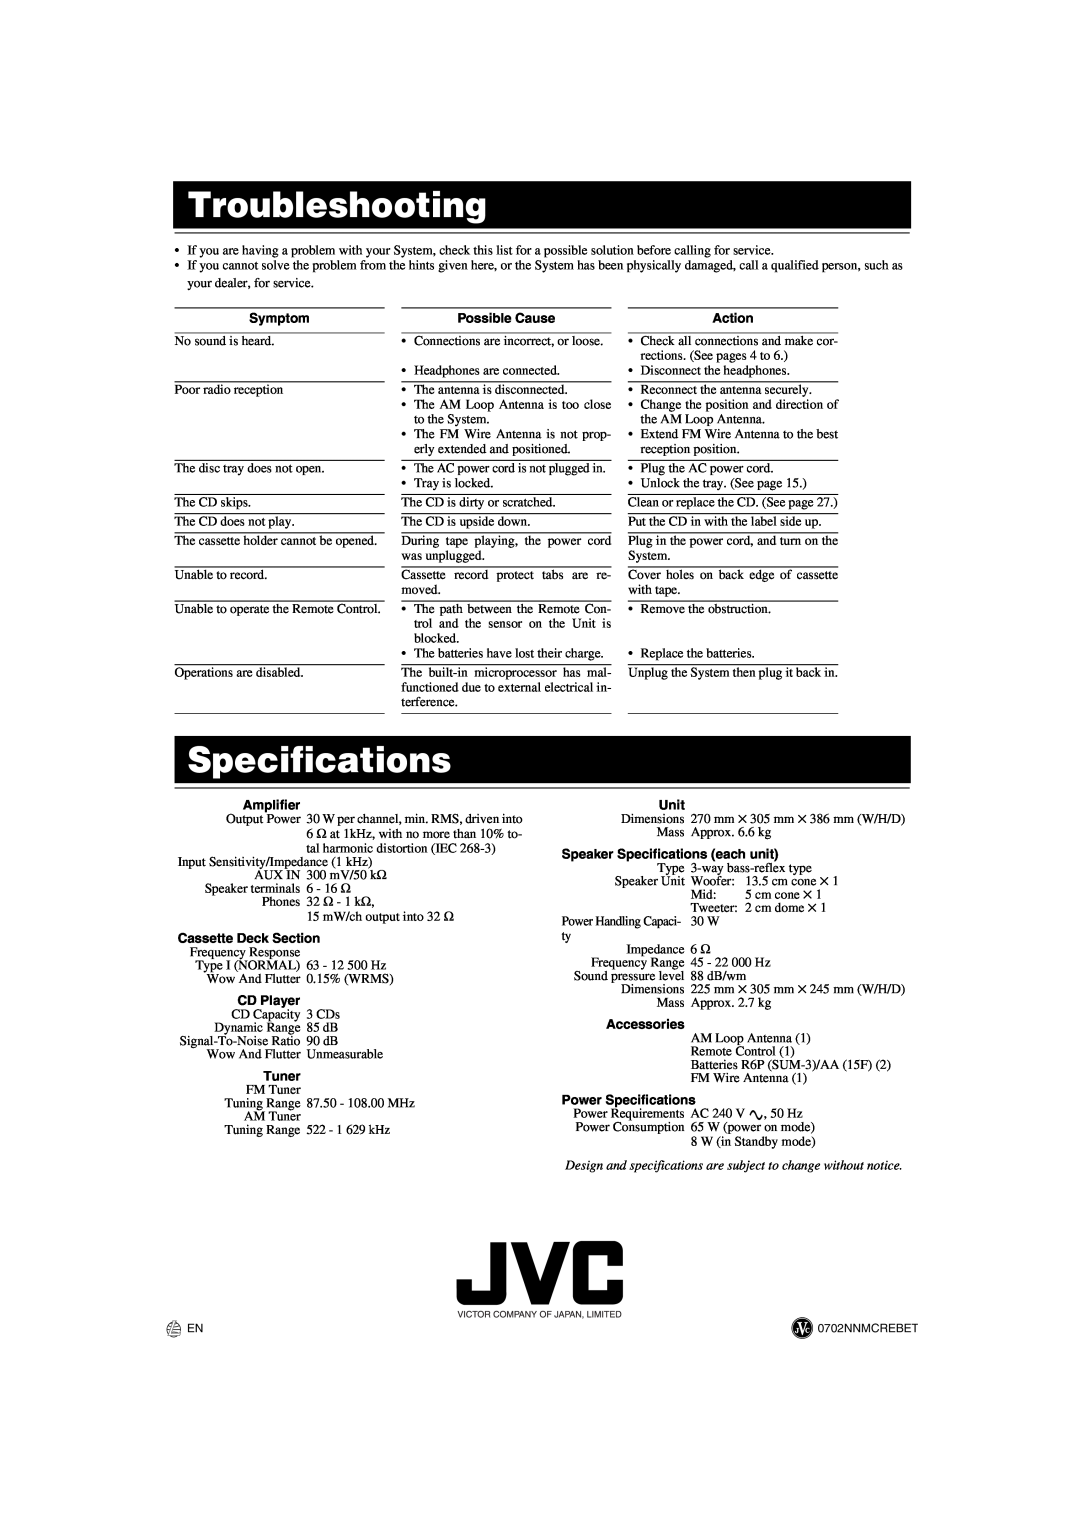 JVC MX-K10 Troubleshooting, Specifications, Symptom, Possible Cause, Action, Amplifier, Cassette Deck Section, CD Player 